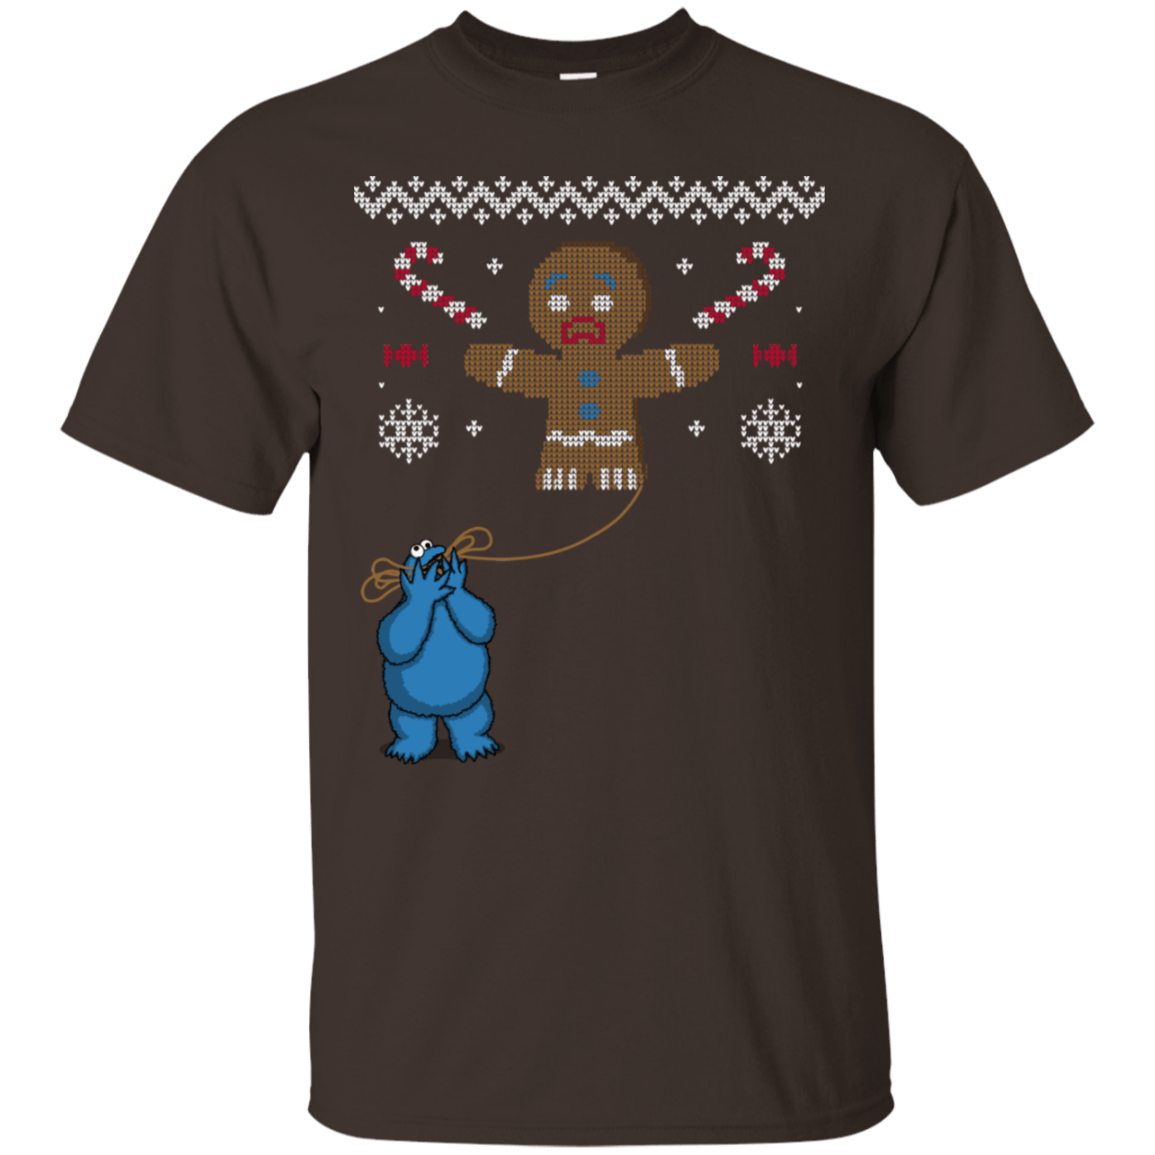 T-Shirts Dark Chocolate / S Ugly Cookie T-Shirt